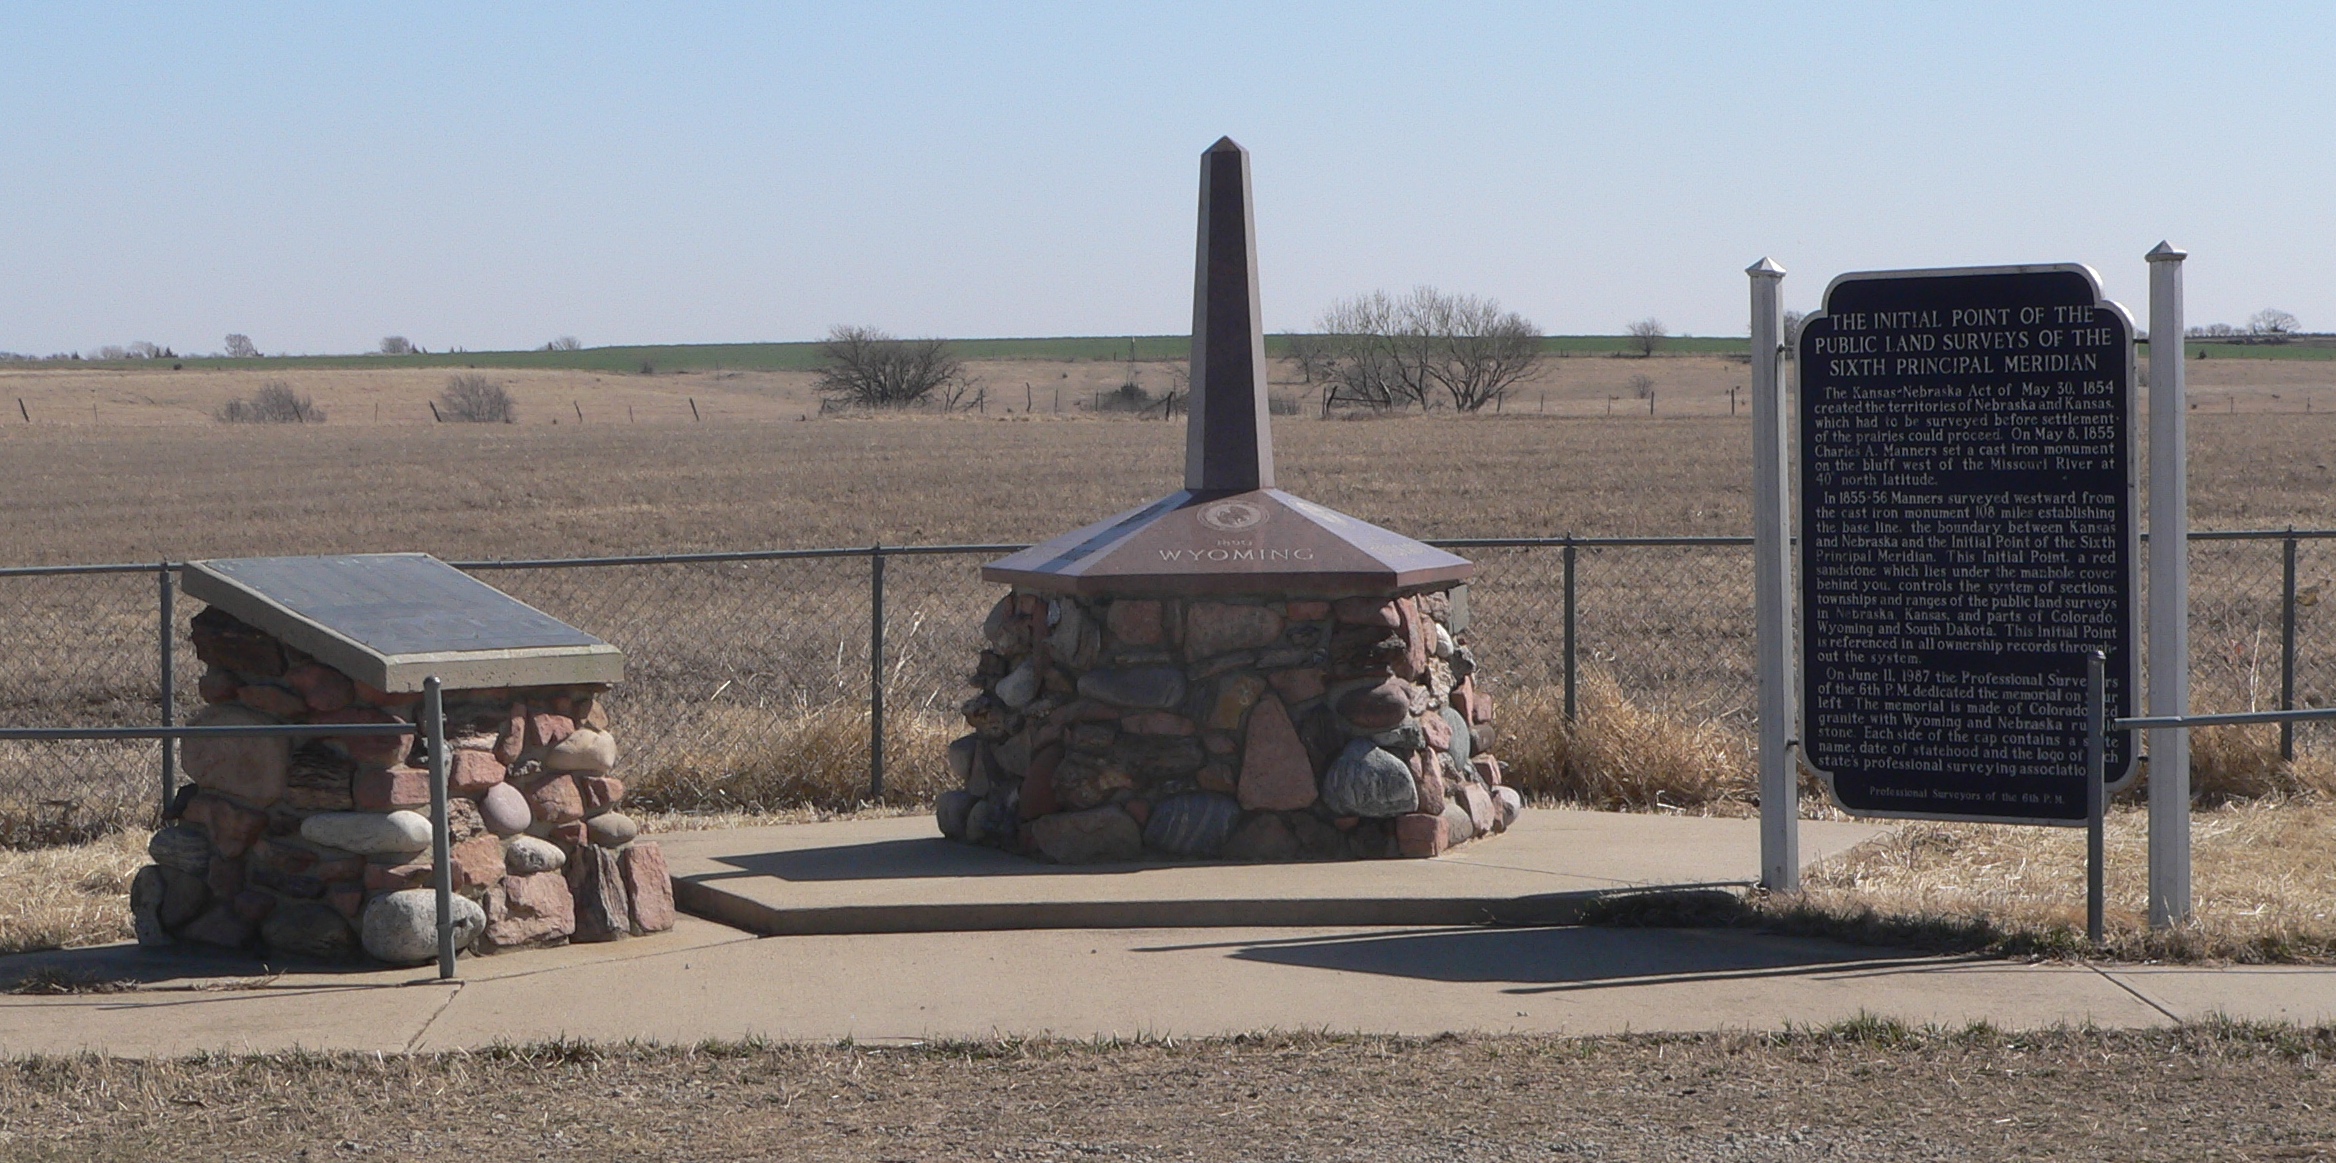  Survey monument JF00-072, located on Nebraska-Kansas state line at intersection of Nebraska counties Thayer and Jefferson and Kansas counties Washington and Republic; marking the intersection of 40 degrees north latitude and the Sixth Principal Meridian. Monuments and historical marker, seen from the west. Photo taken on March 9, 2012.